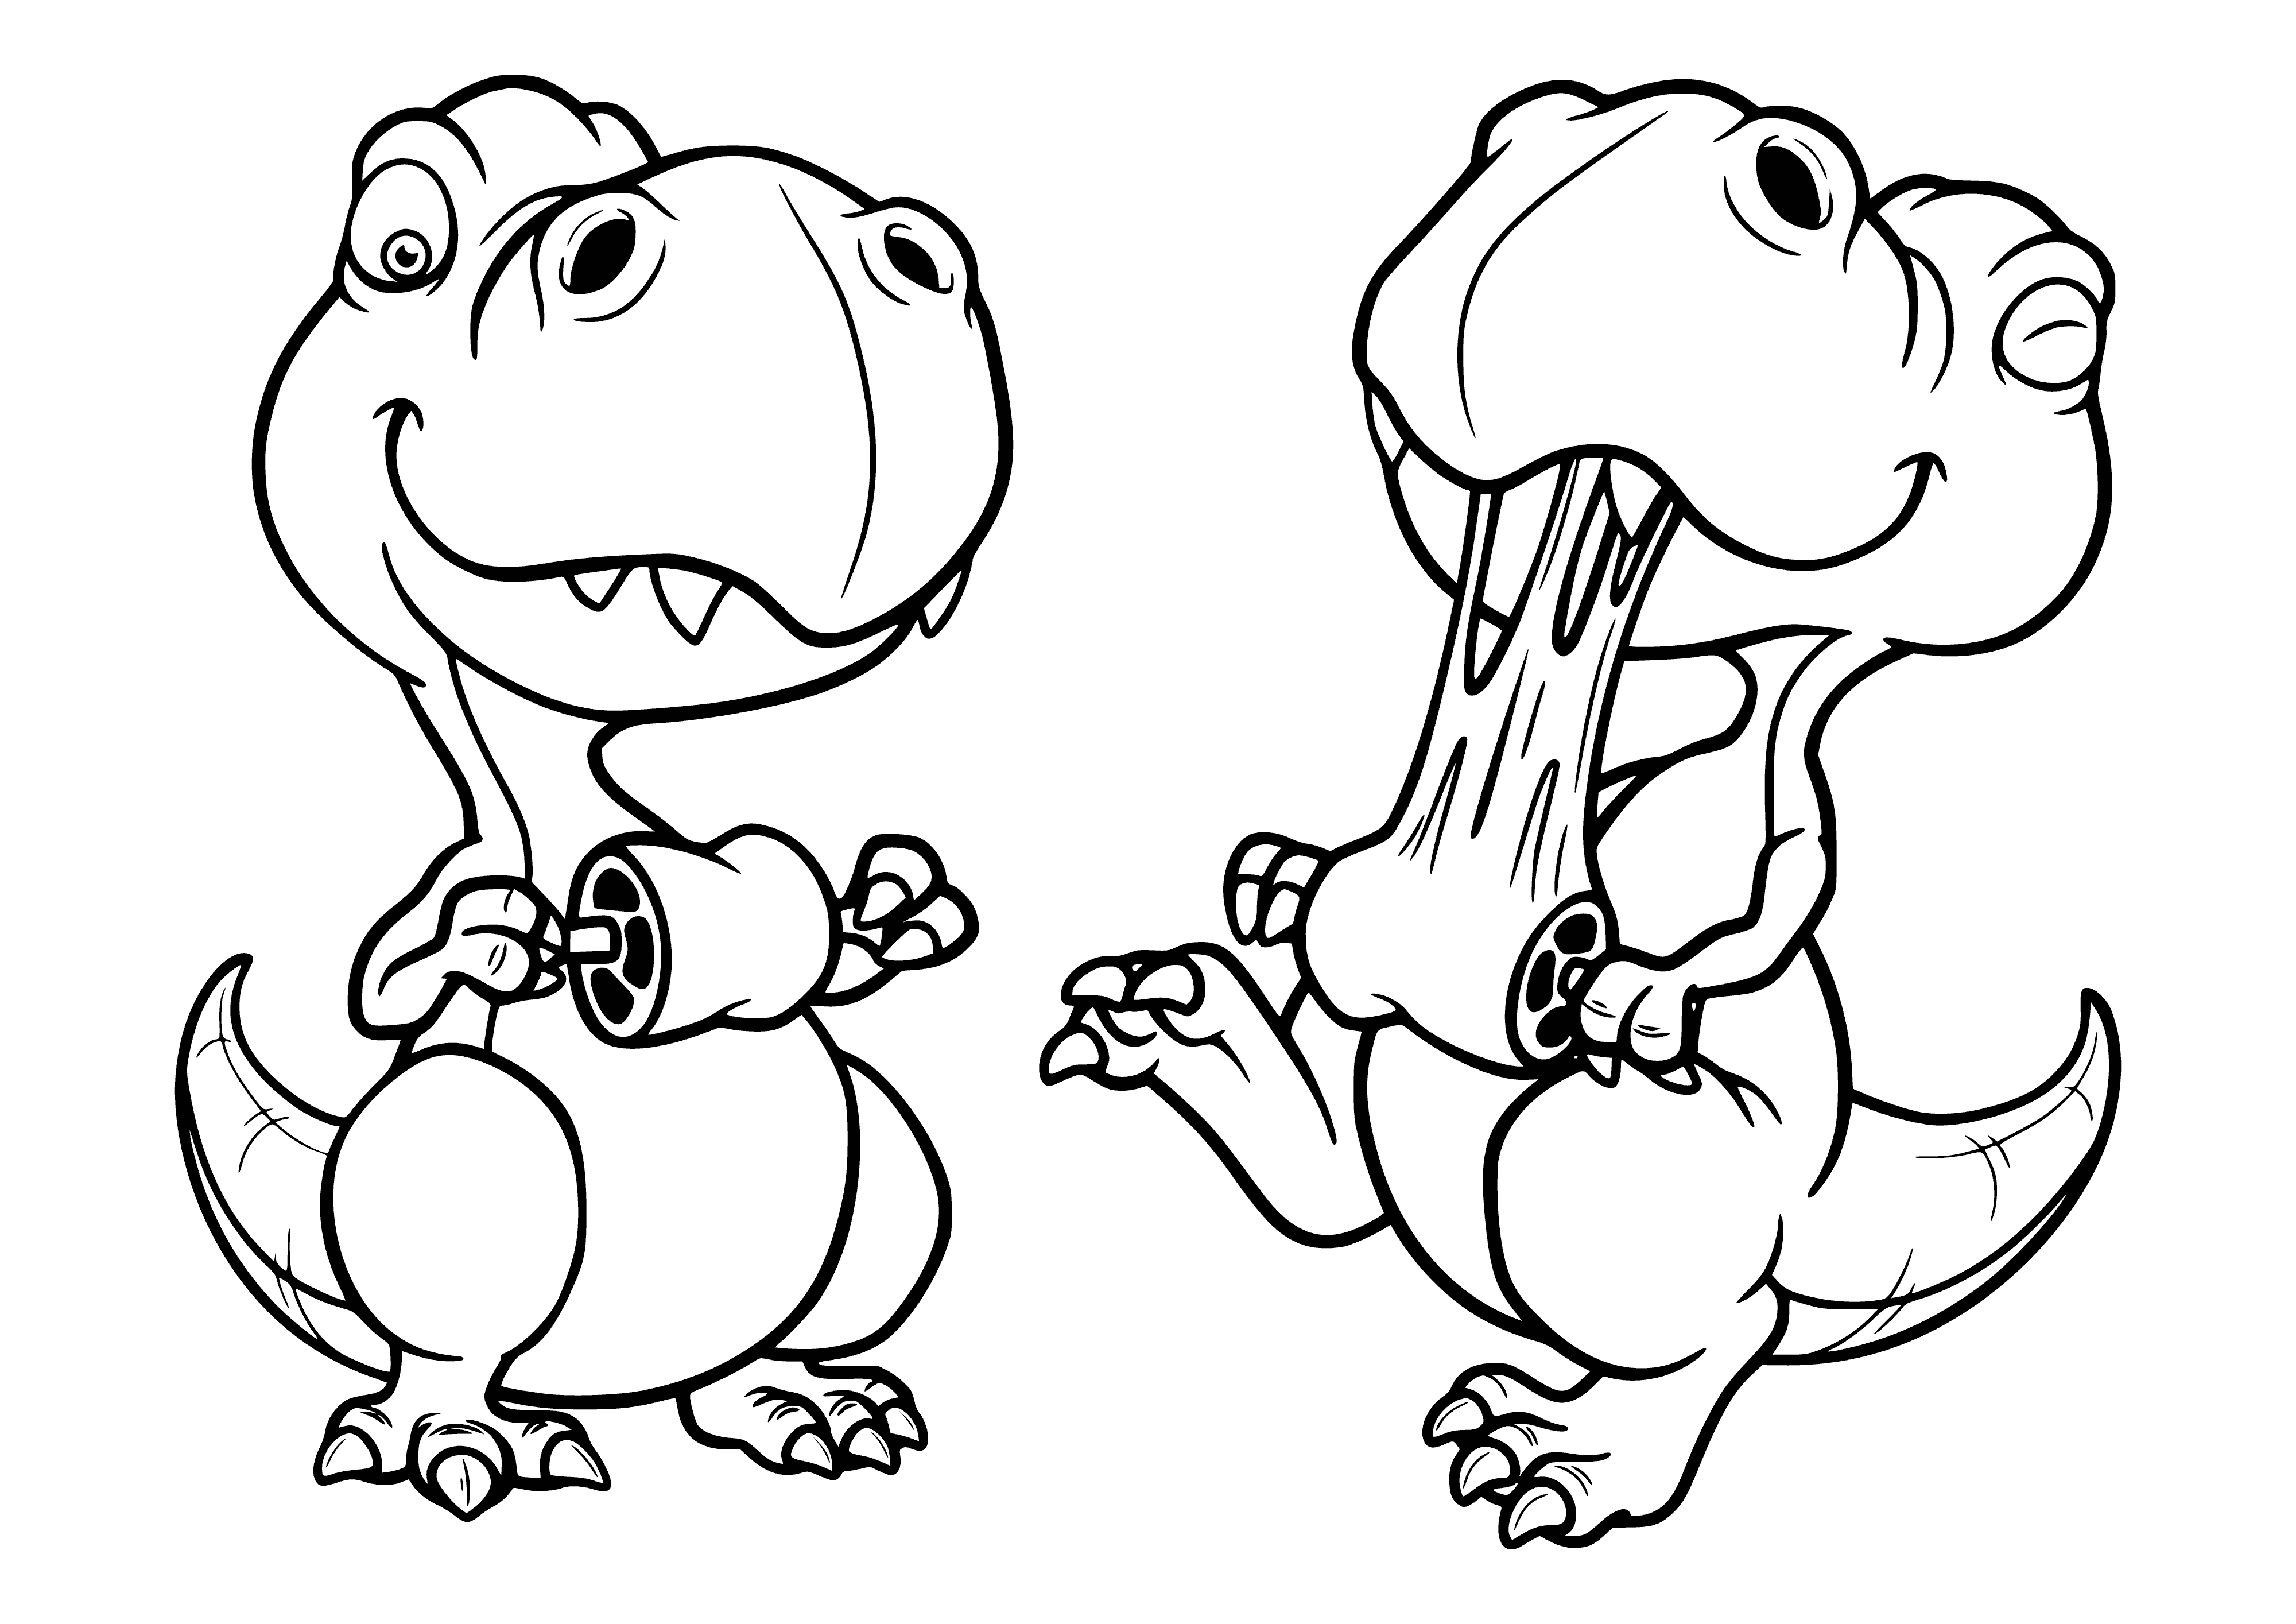 coloring page: Two large, green & yellow-spotted dinosaurs eating in a forest: one eating leaves, the other a smaller dinosaur.